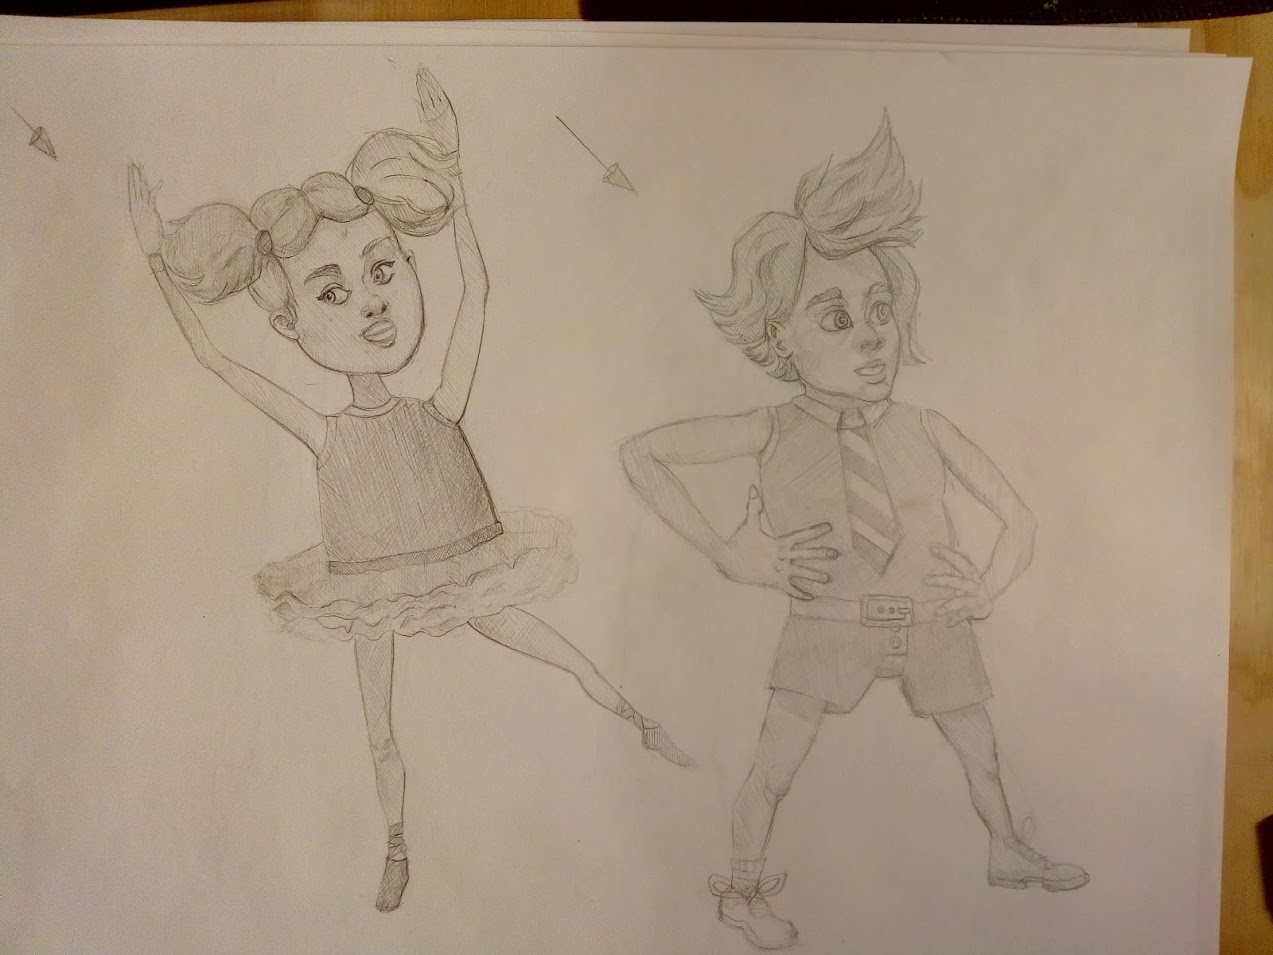 Ballerina and Business boy character drawings - Show 